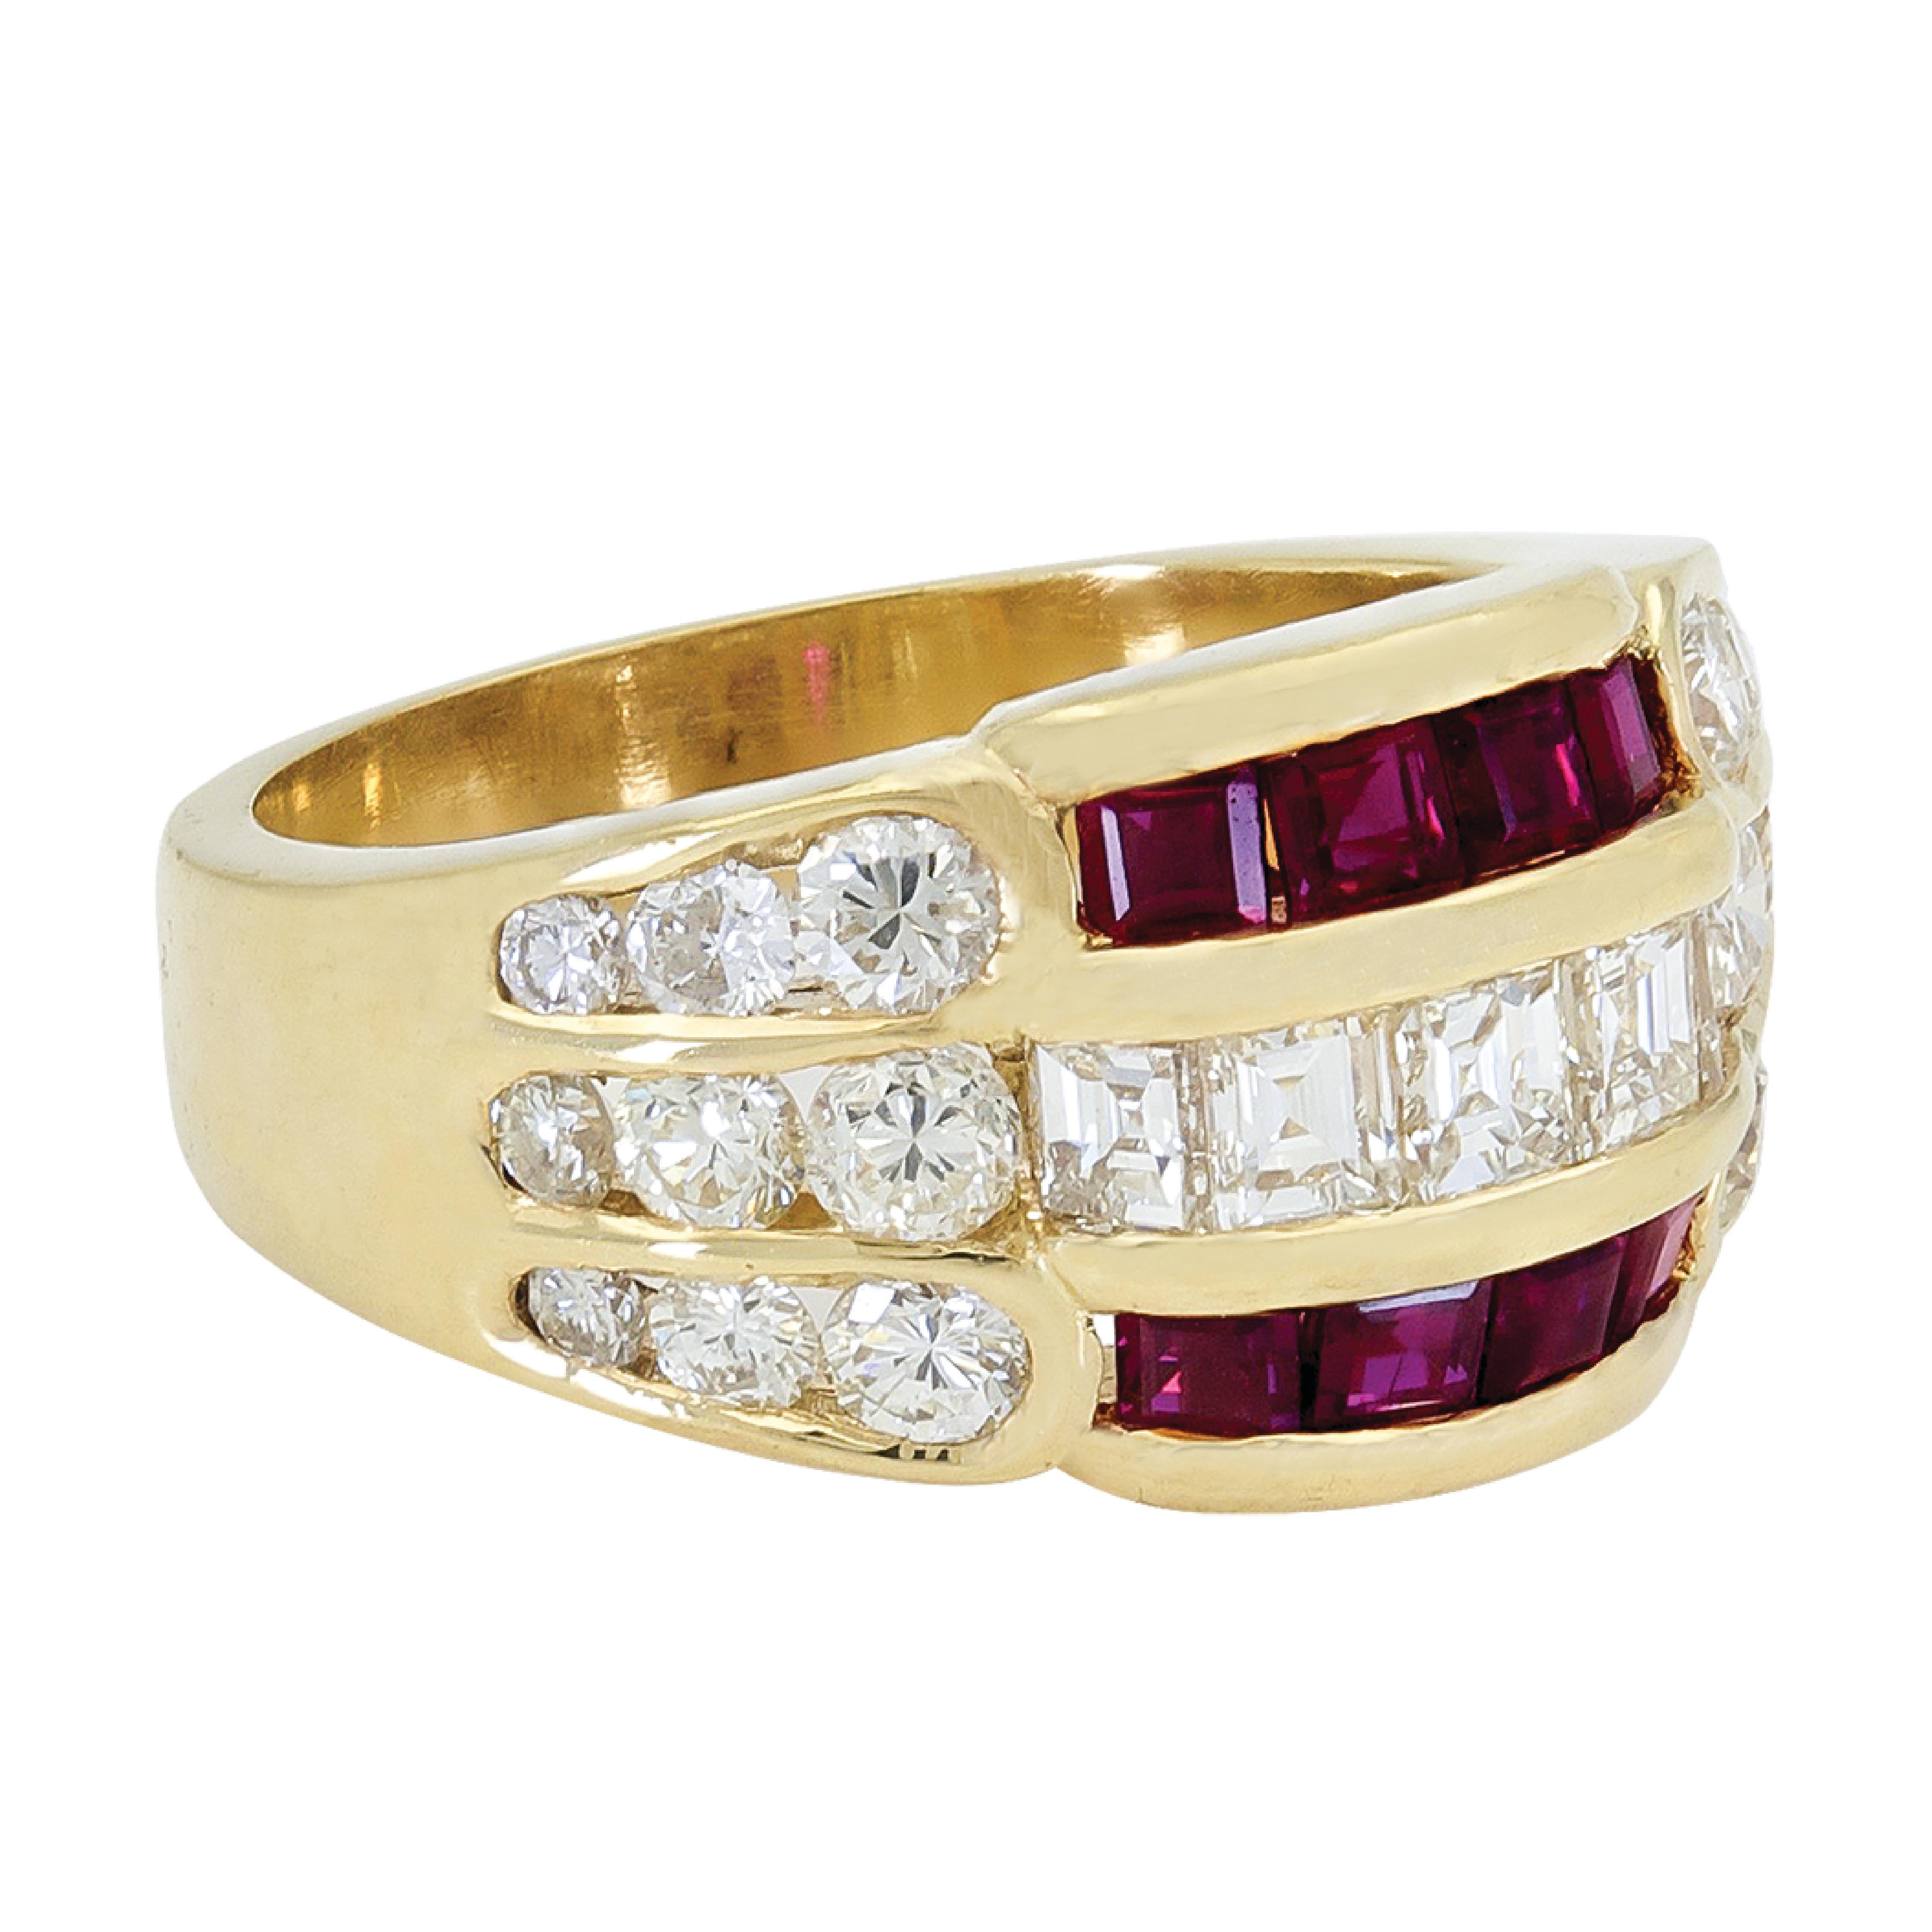 18 karat yellow gold 0.68 carats weight of rubies with total diamonds weigh 1.18 carats dome ring

Sophia D by Joseph Dardashti LTD has been known worldwide for 35 years and are inspired by classic Art Deco design that merges with modern